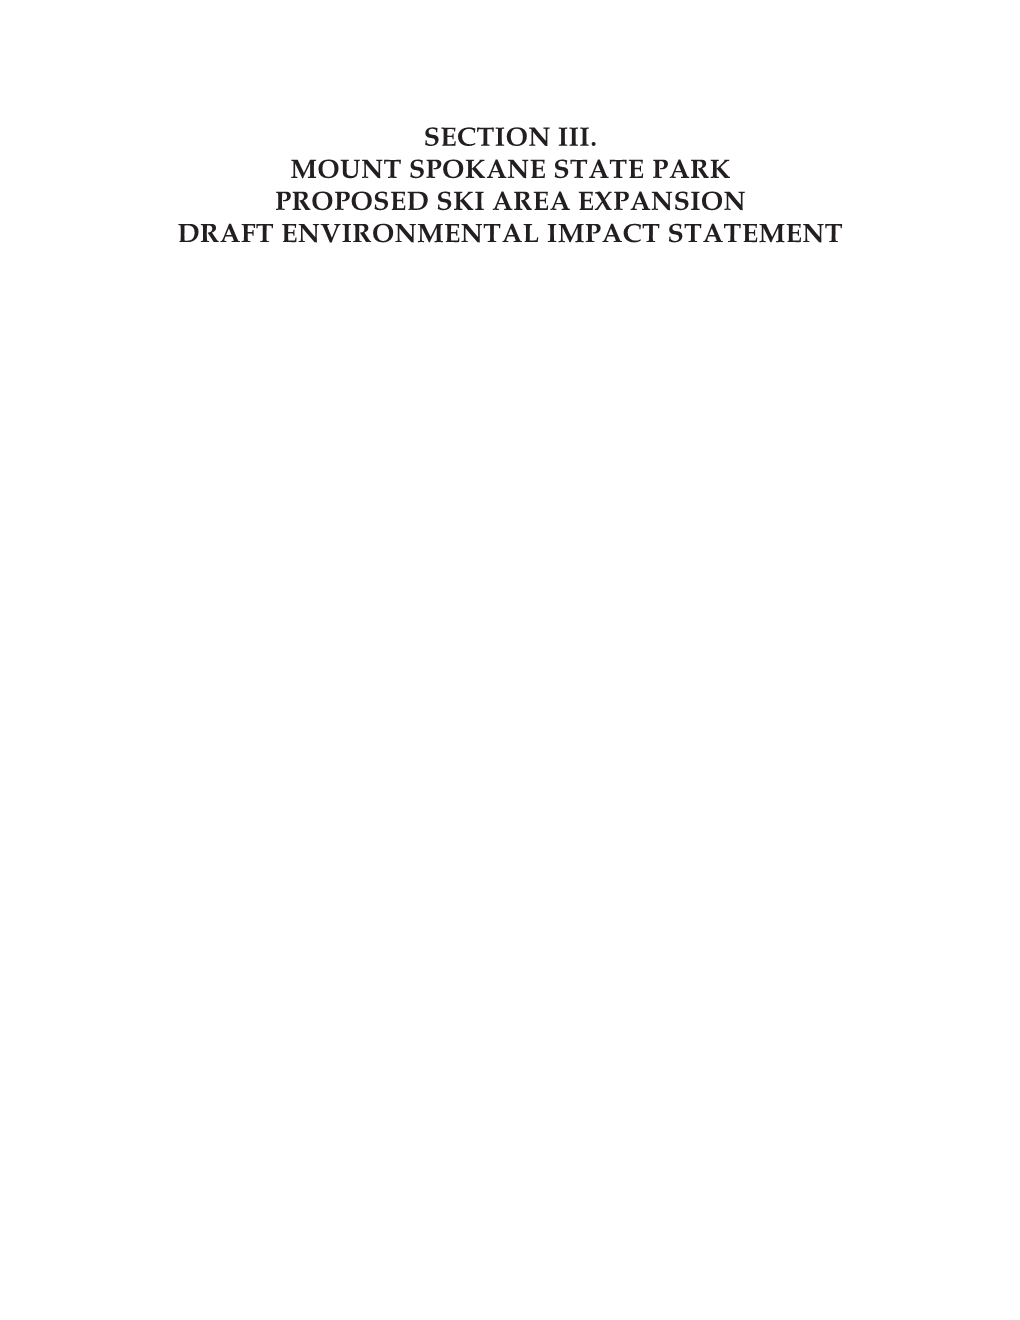 Draft Combined Environmental Impact Statement for the Classification Of